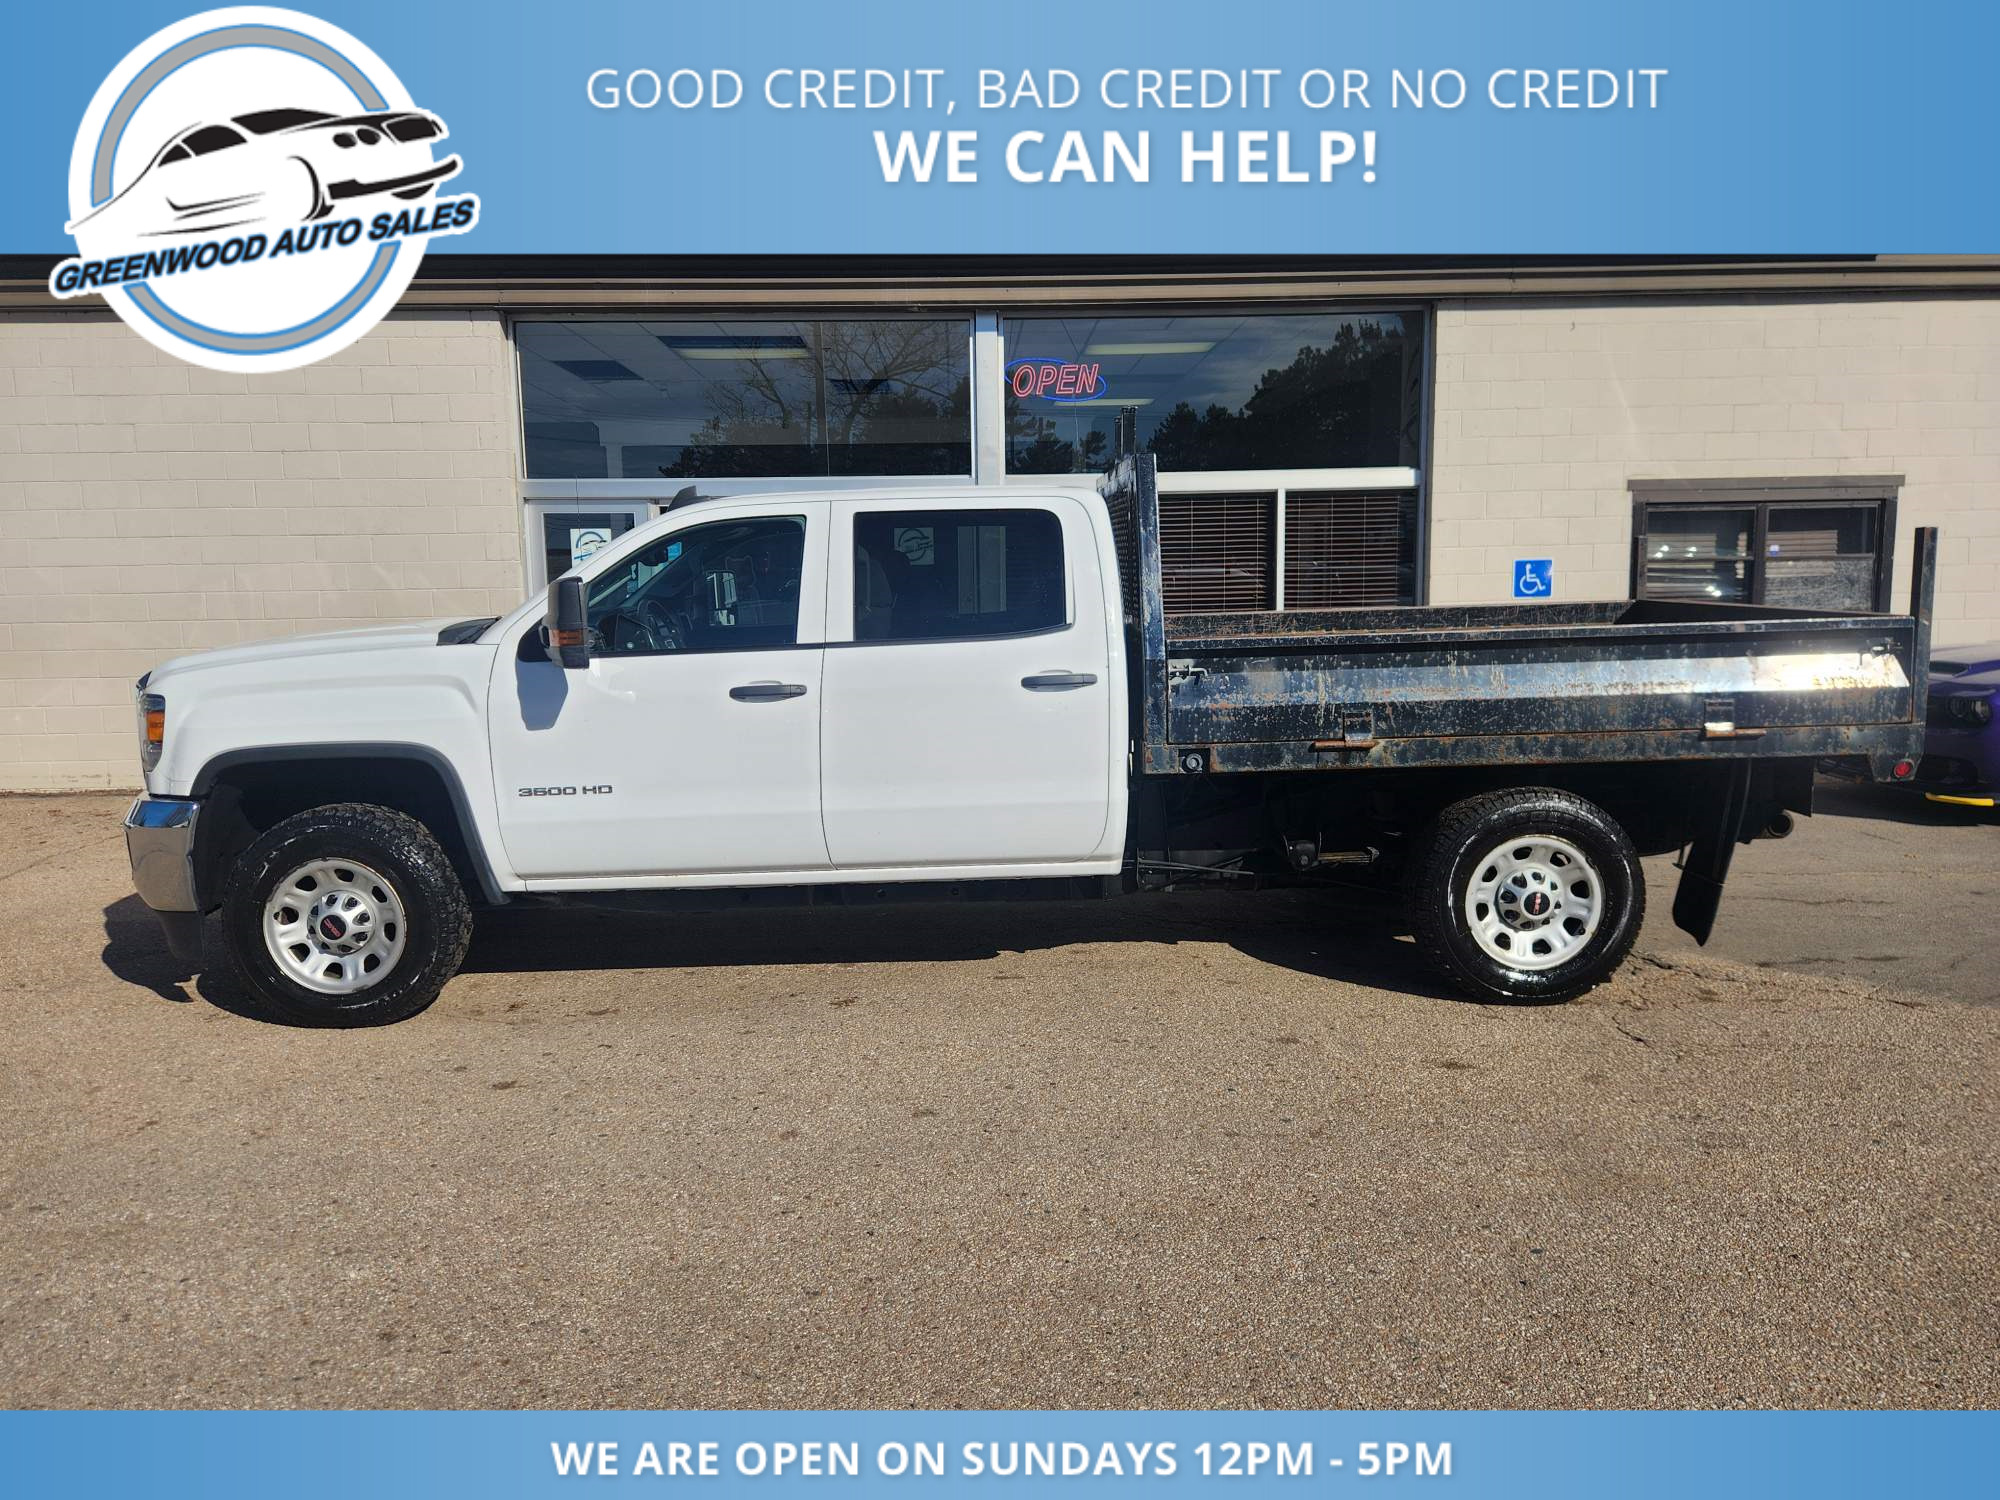 2018 GMC Sierra 3500HD CLEAN CARFAX, GREAT PRICE, READY TO WORK, LEASING 